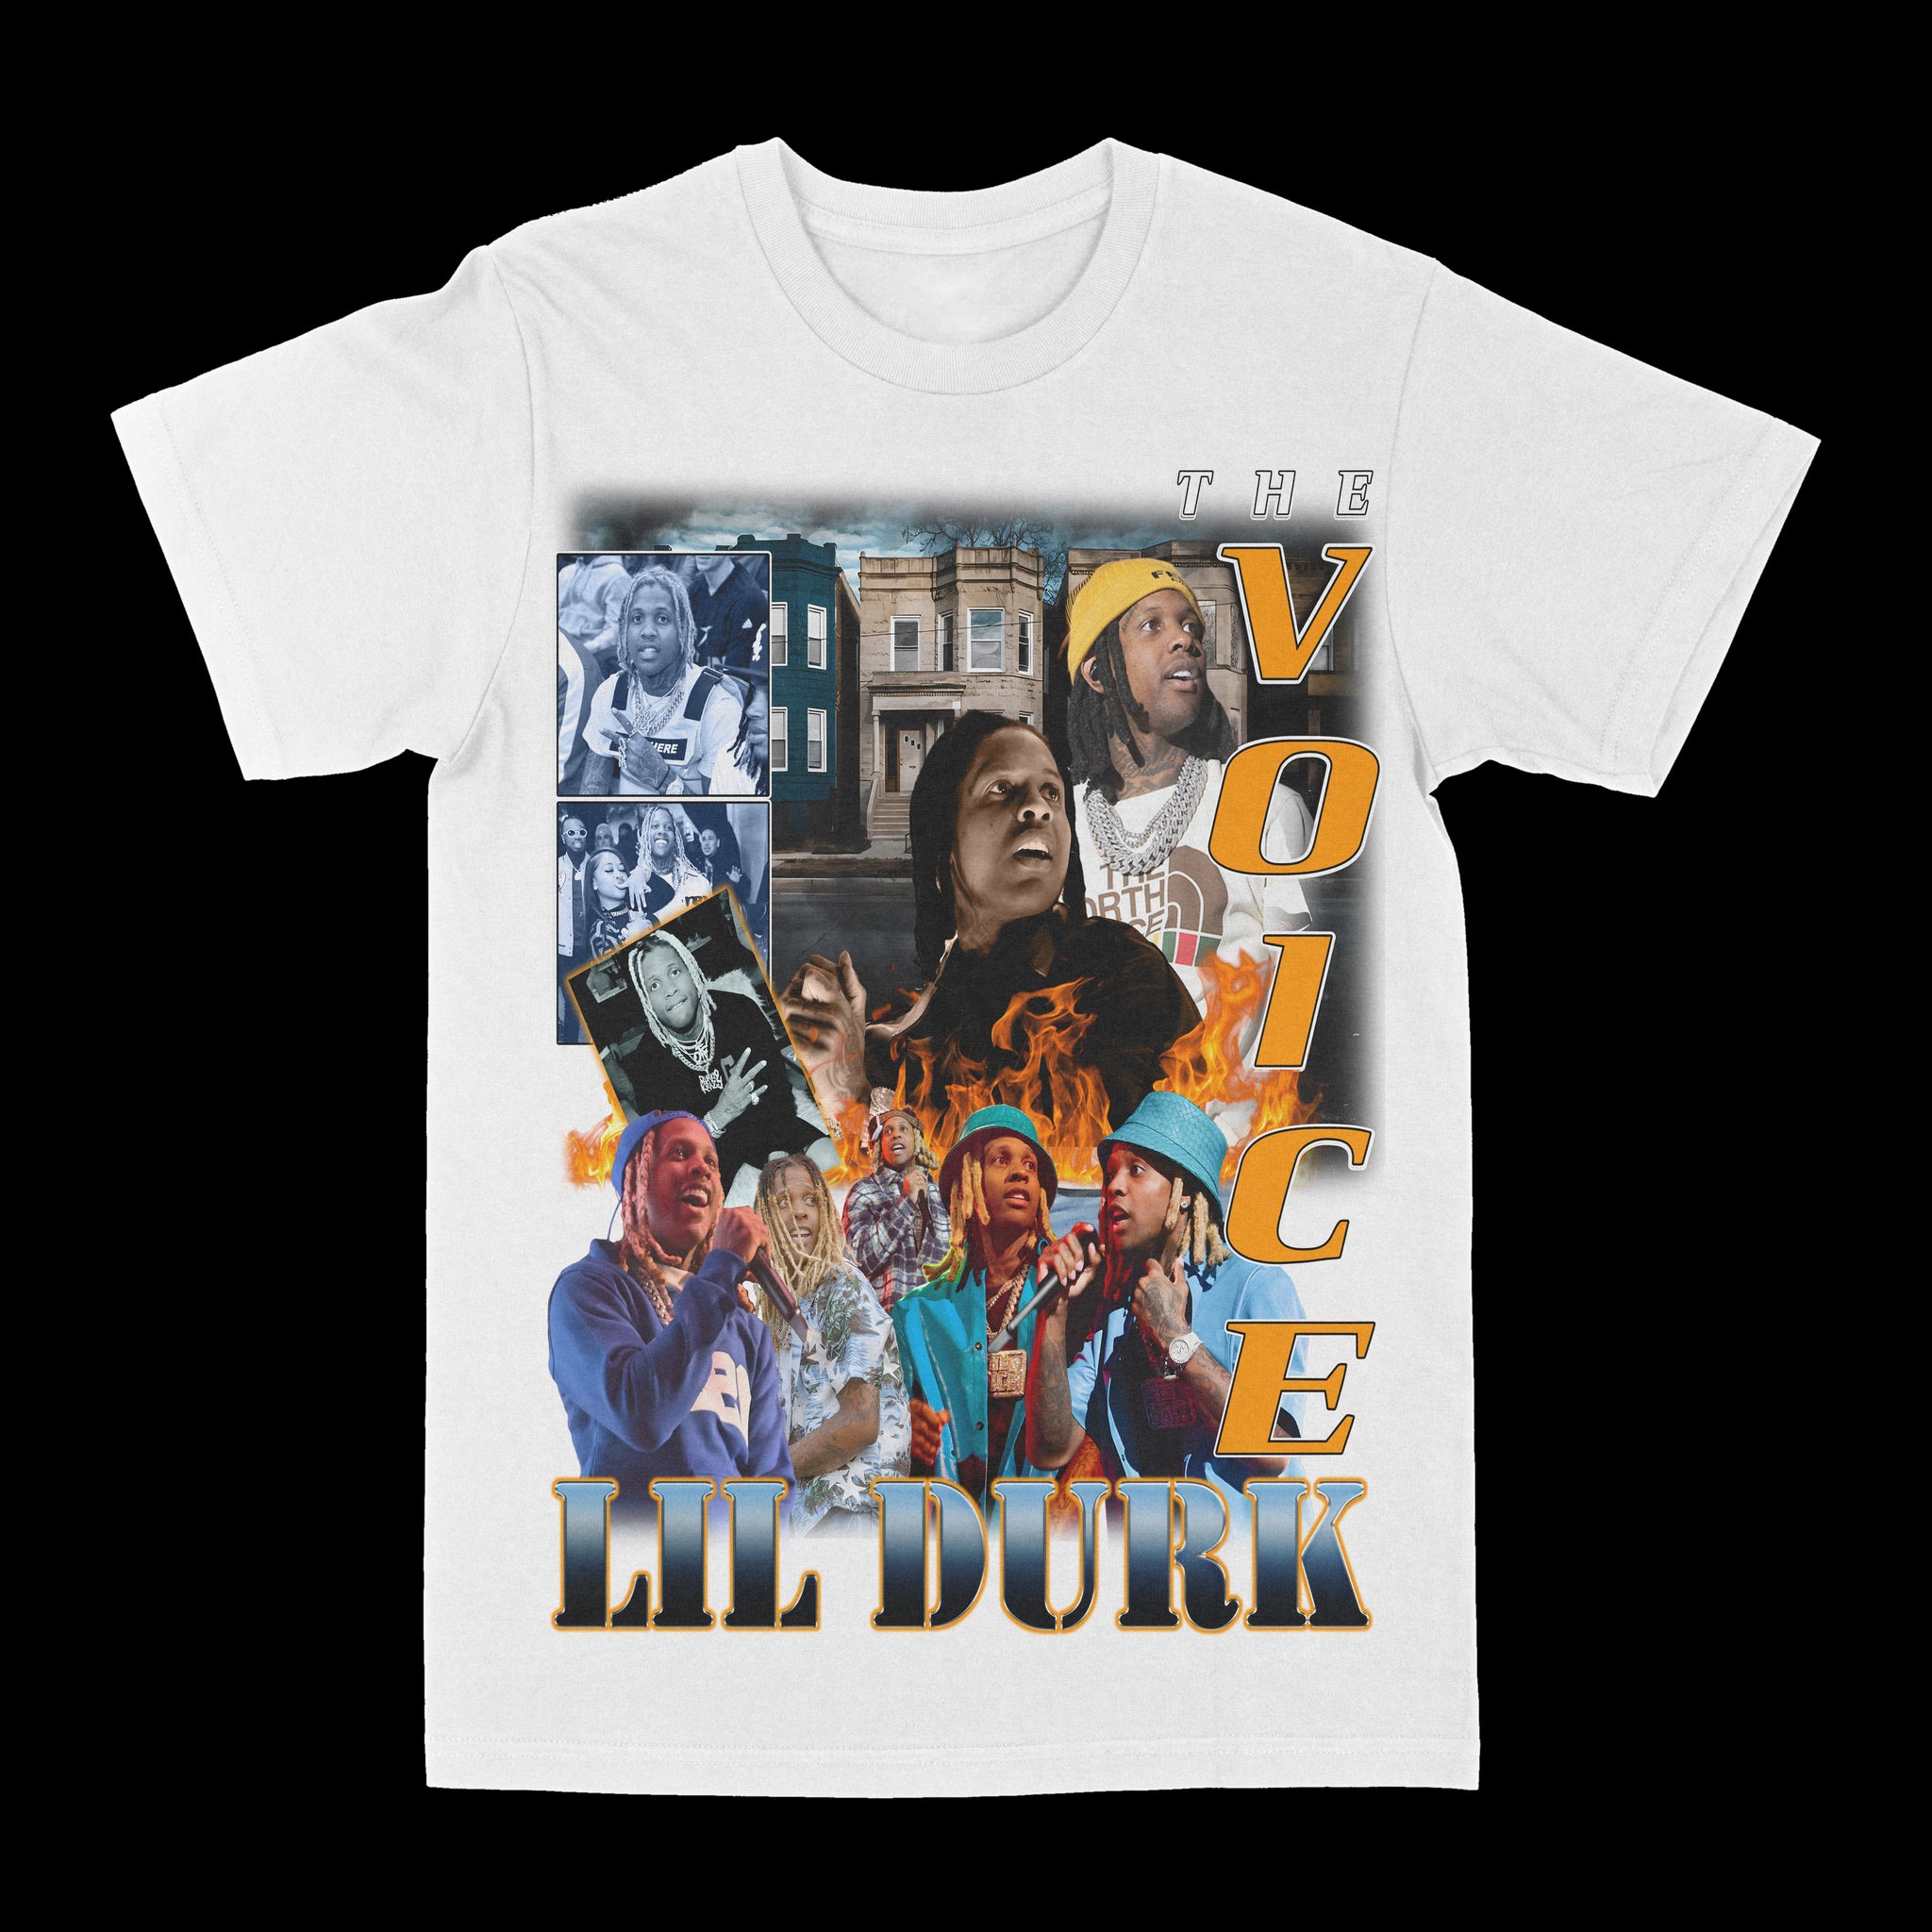 Lil Durk "The Voice" Graphic Tee